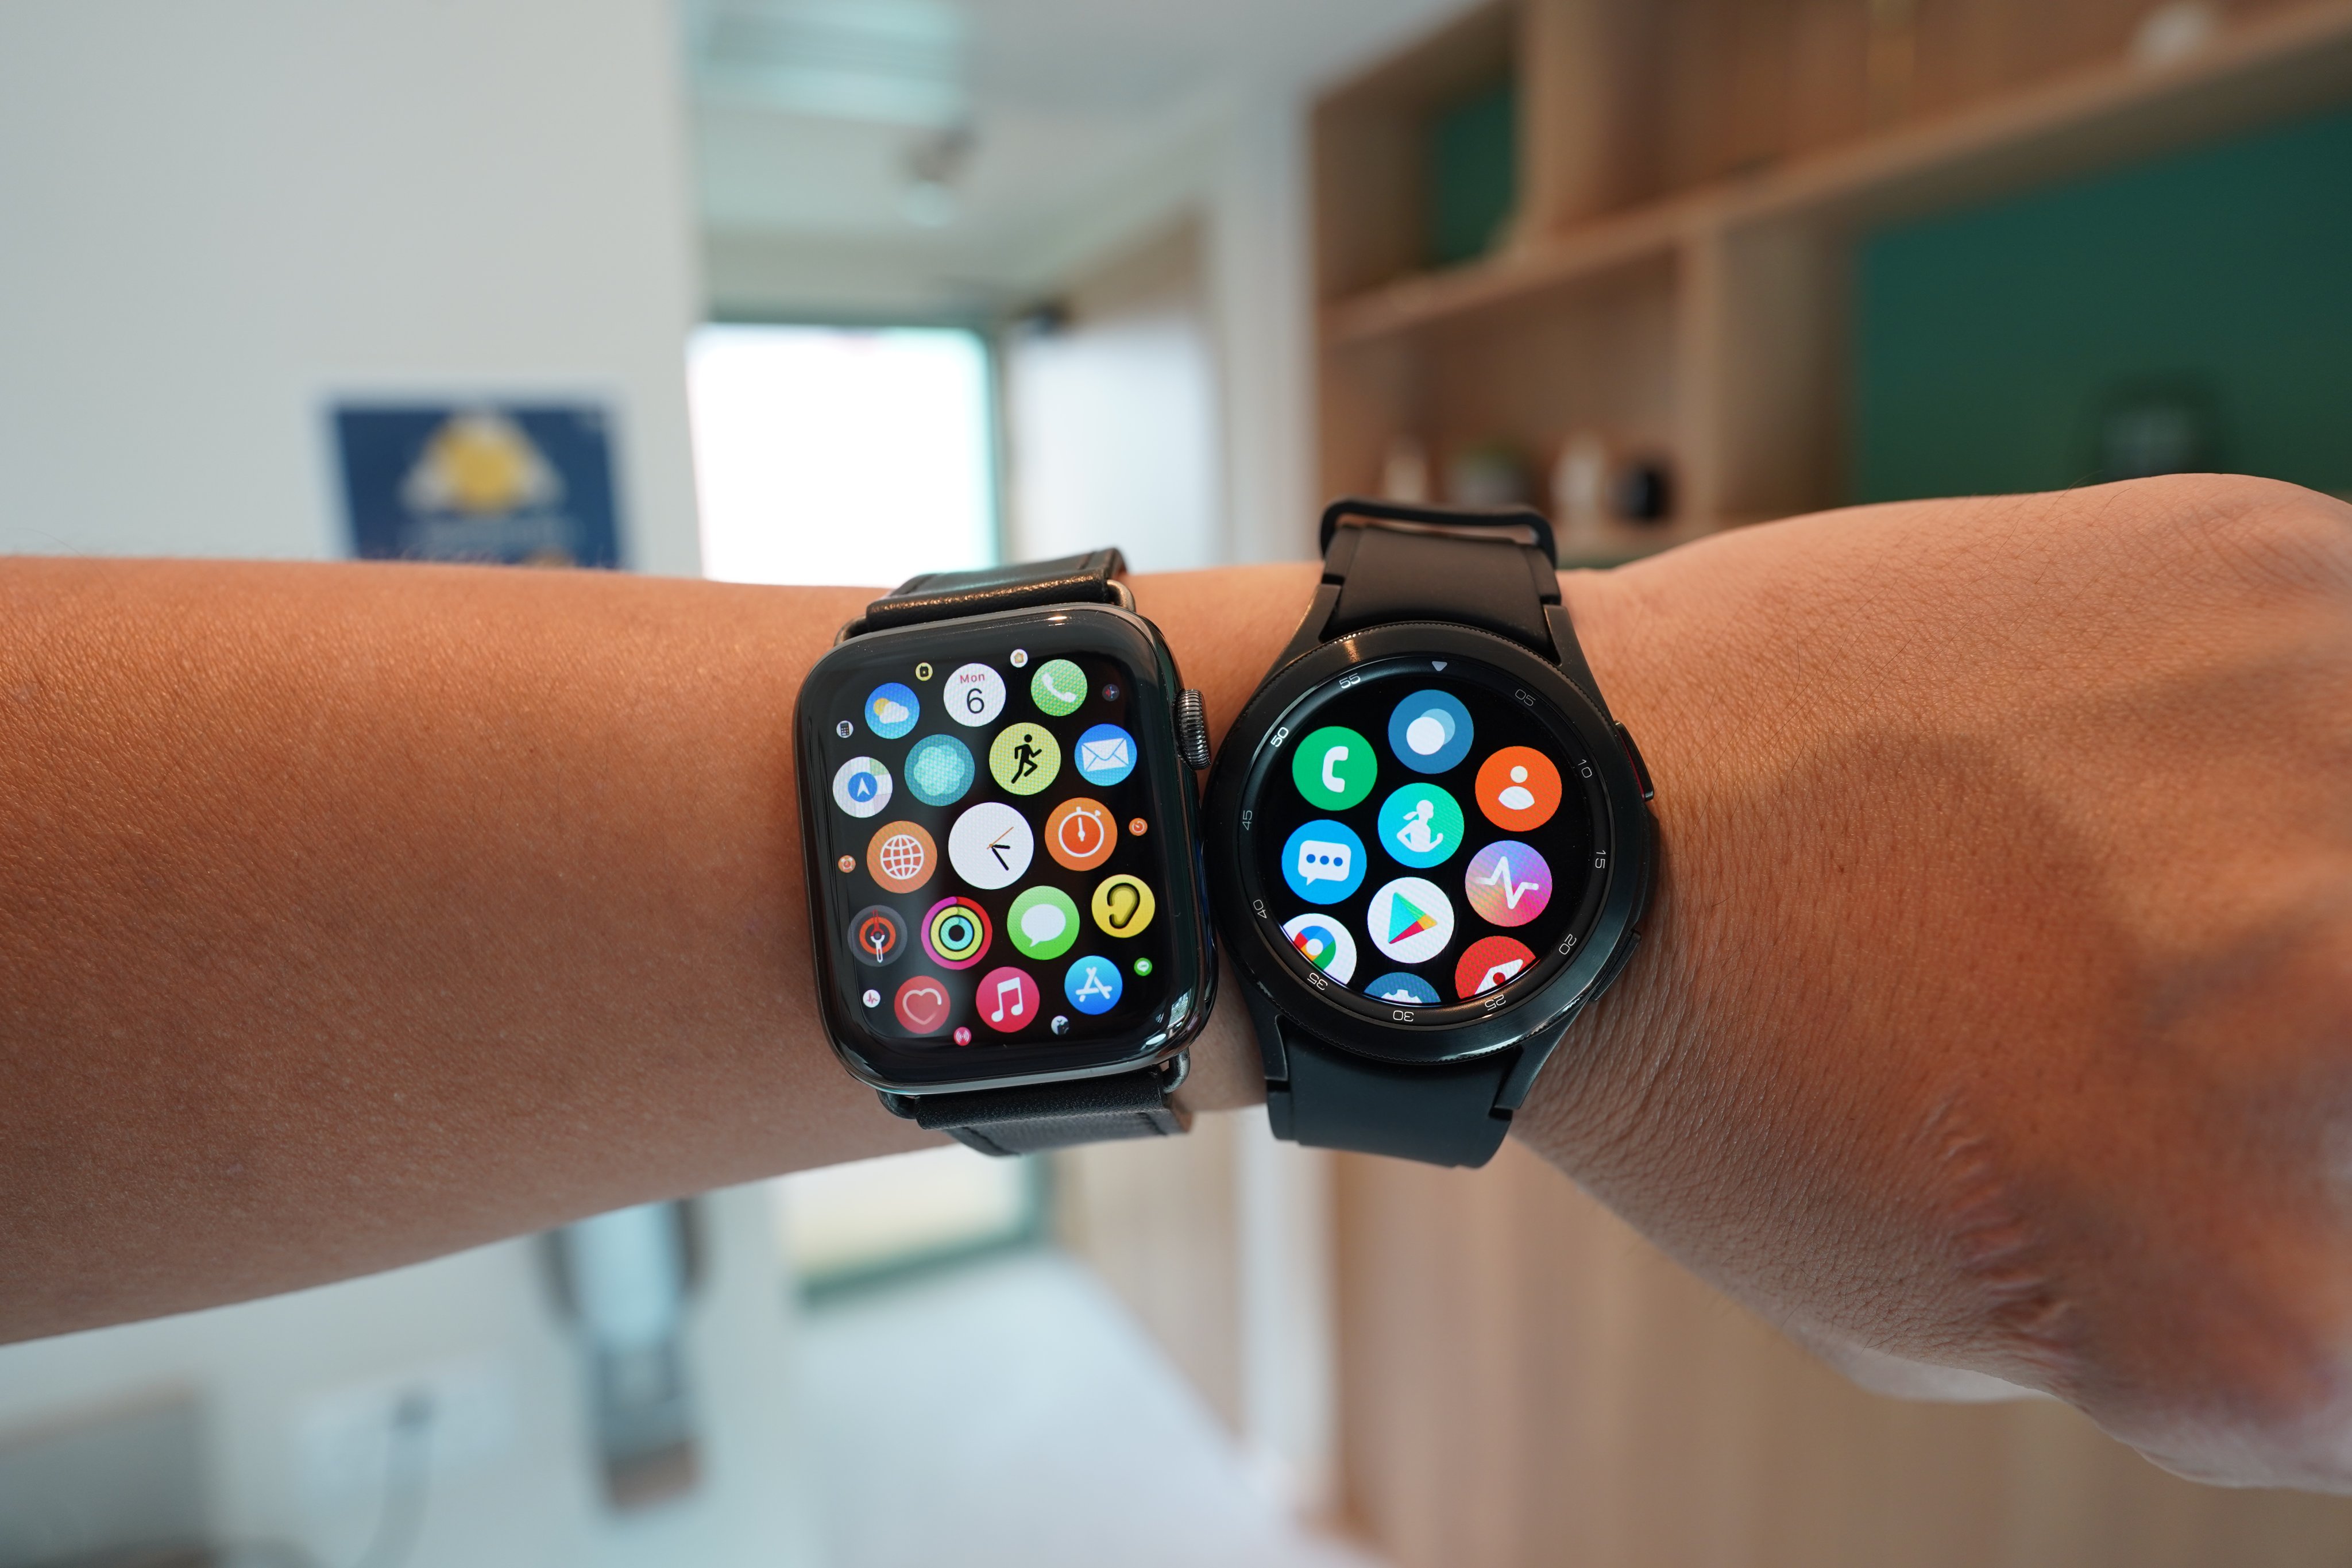 Google and Samsung have combined to take on Apple with the Galaxy Watch 4 smartwatch (right). Photo: Ben Sin